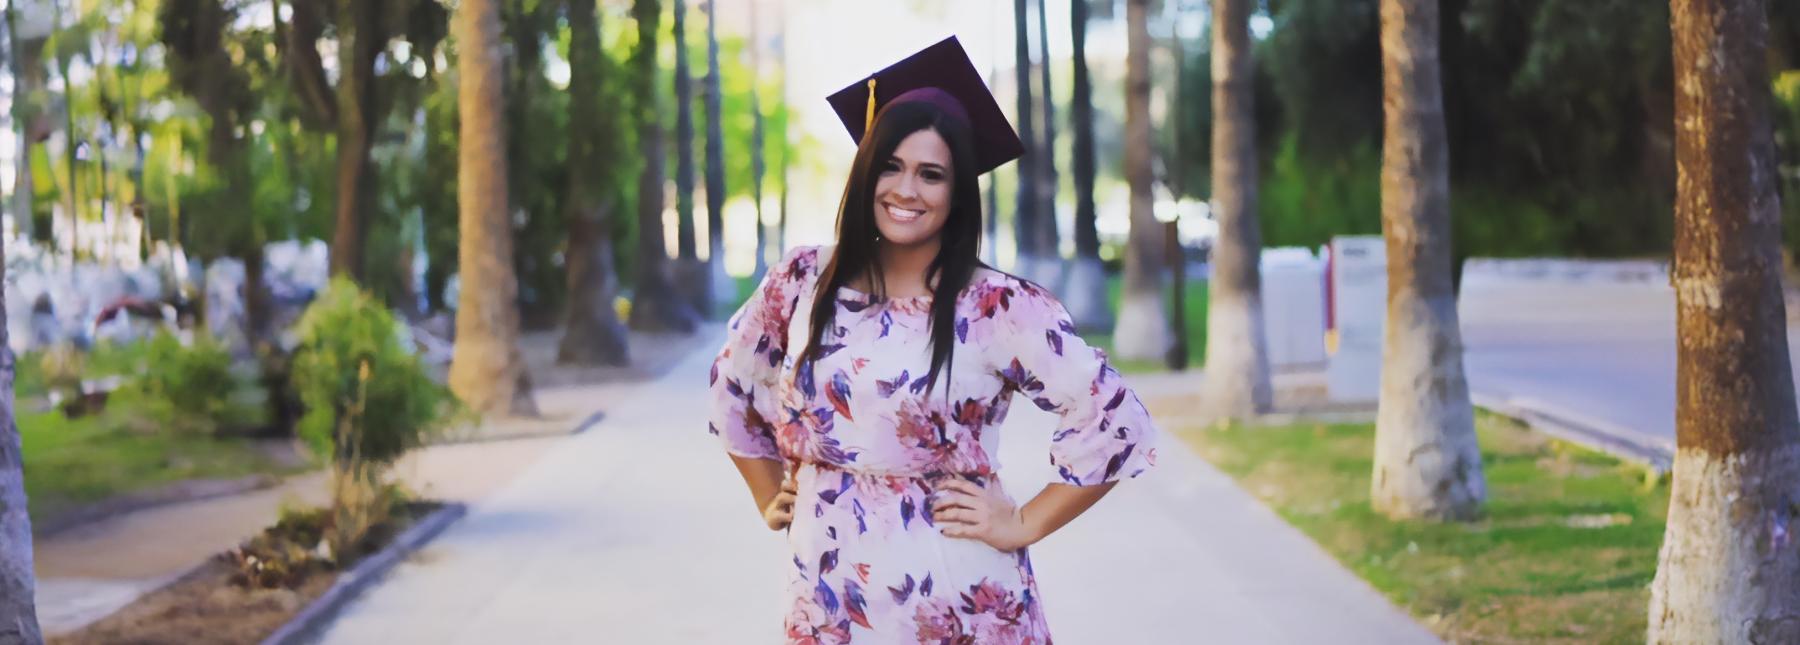 Jennifer Key wearing a graduation cap standing on a paved path with trees in the background